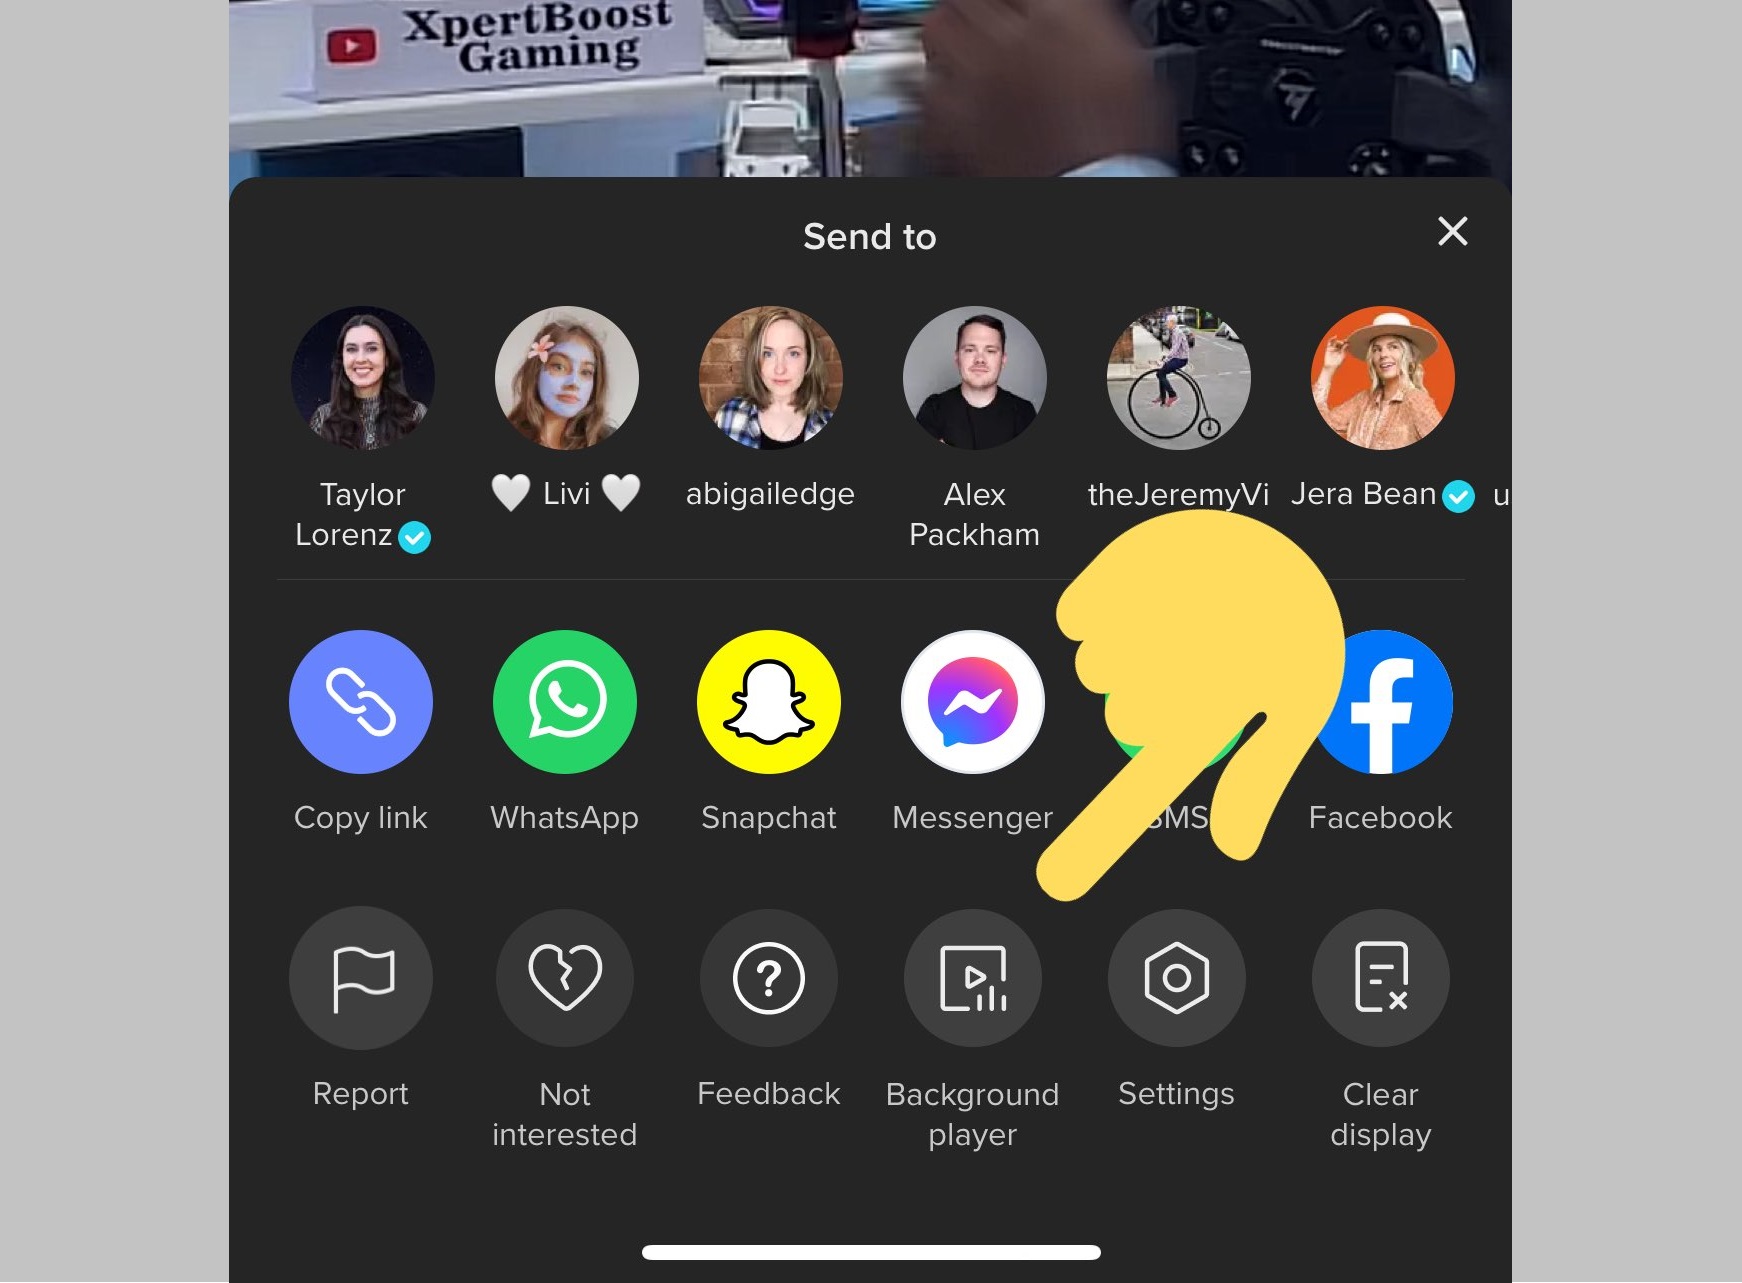 TikTok now allows users to enable a handy Background Playback option for live videos